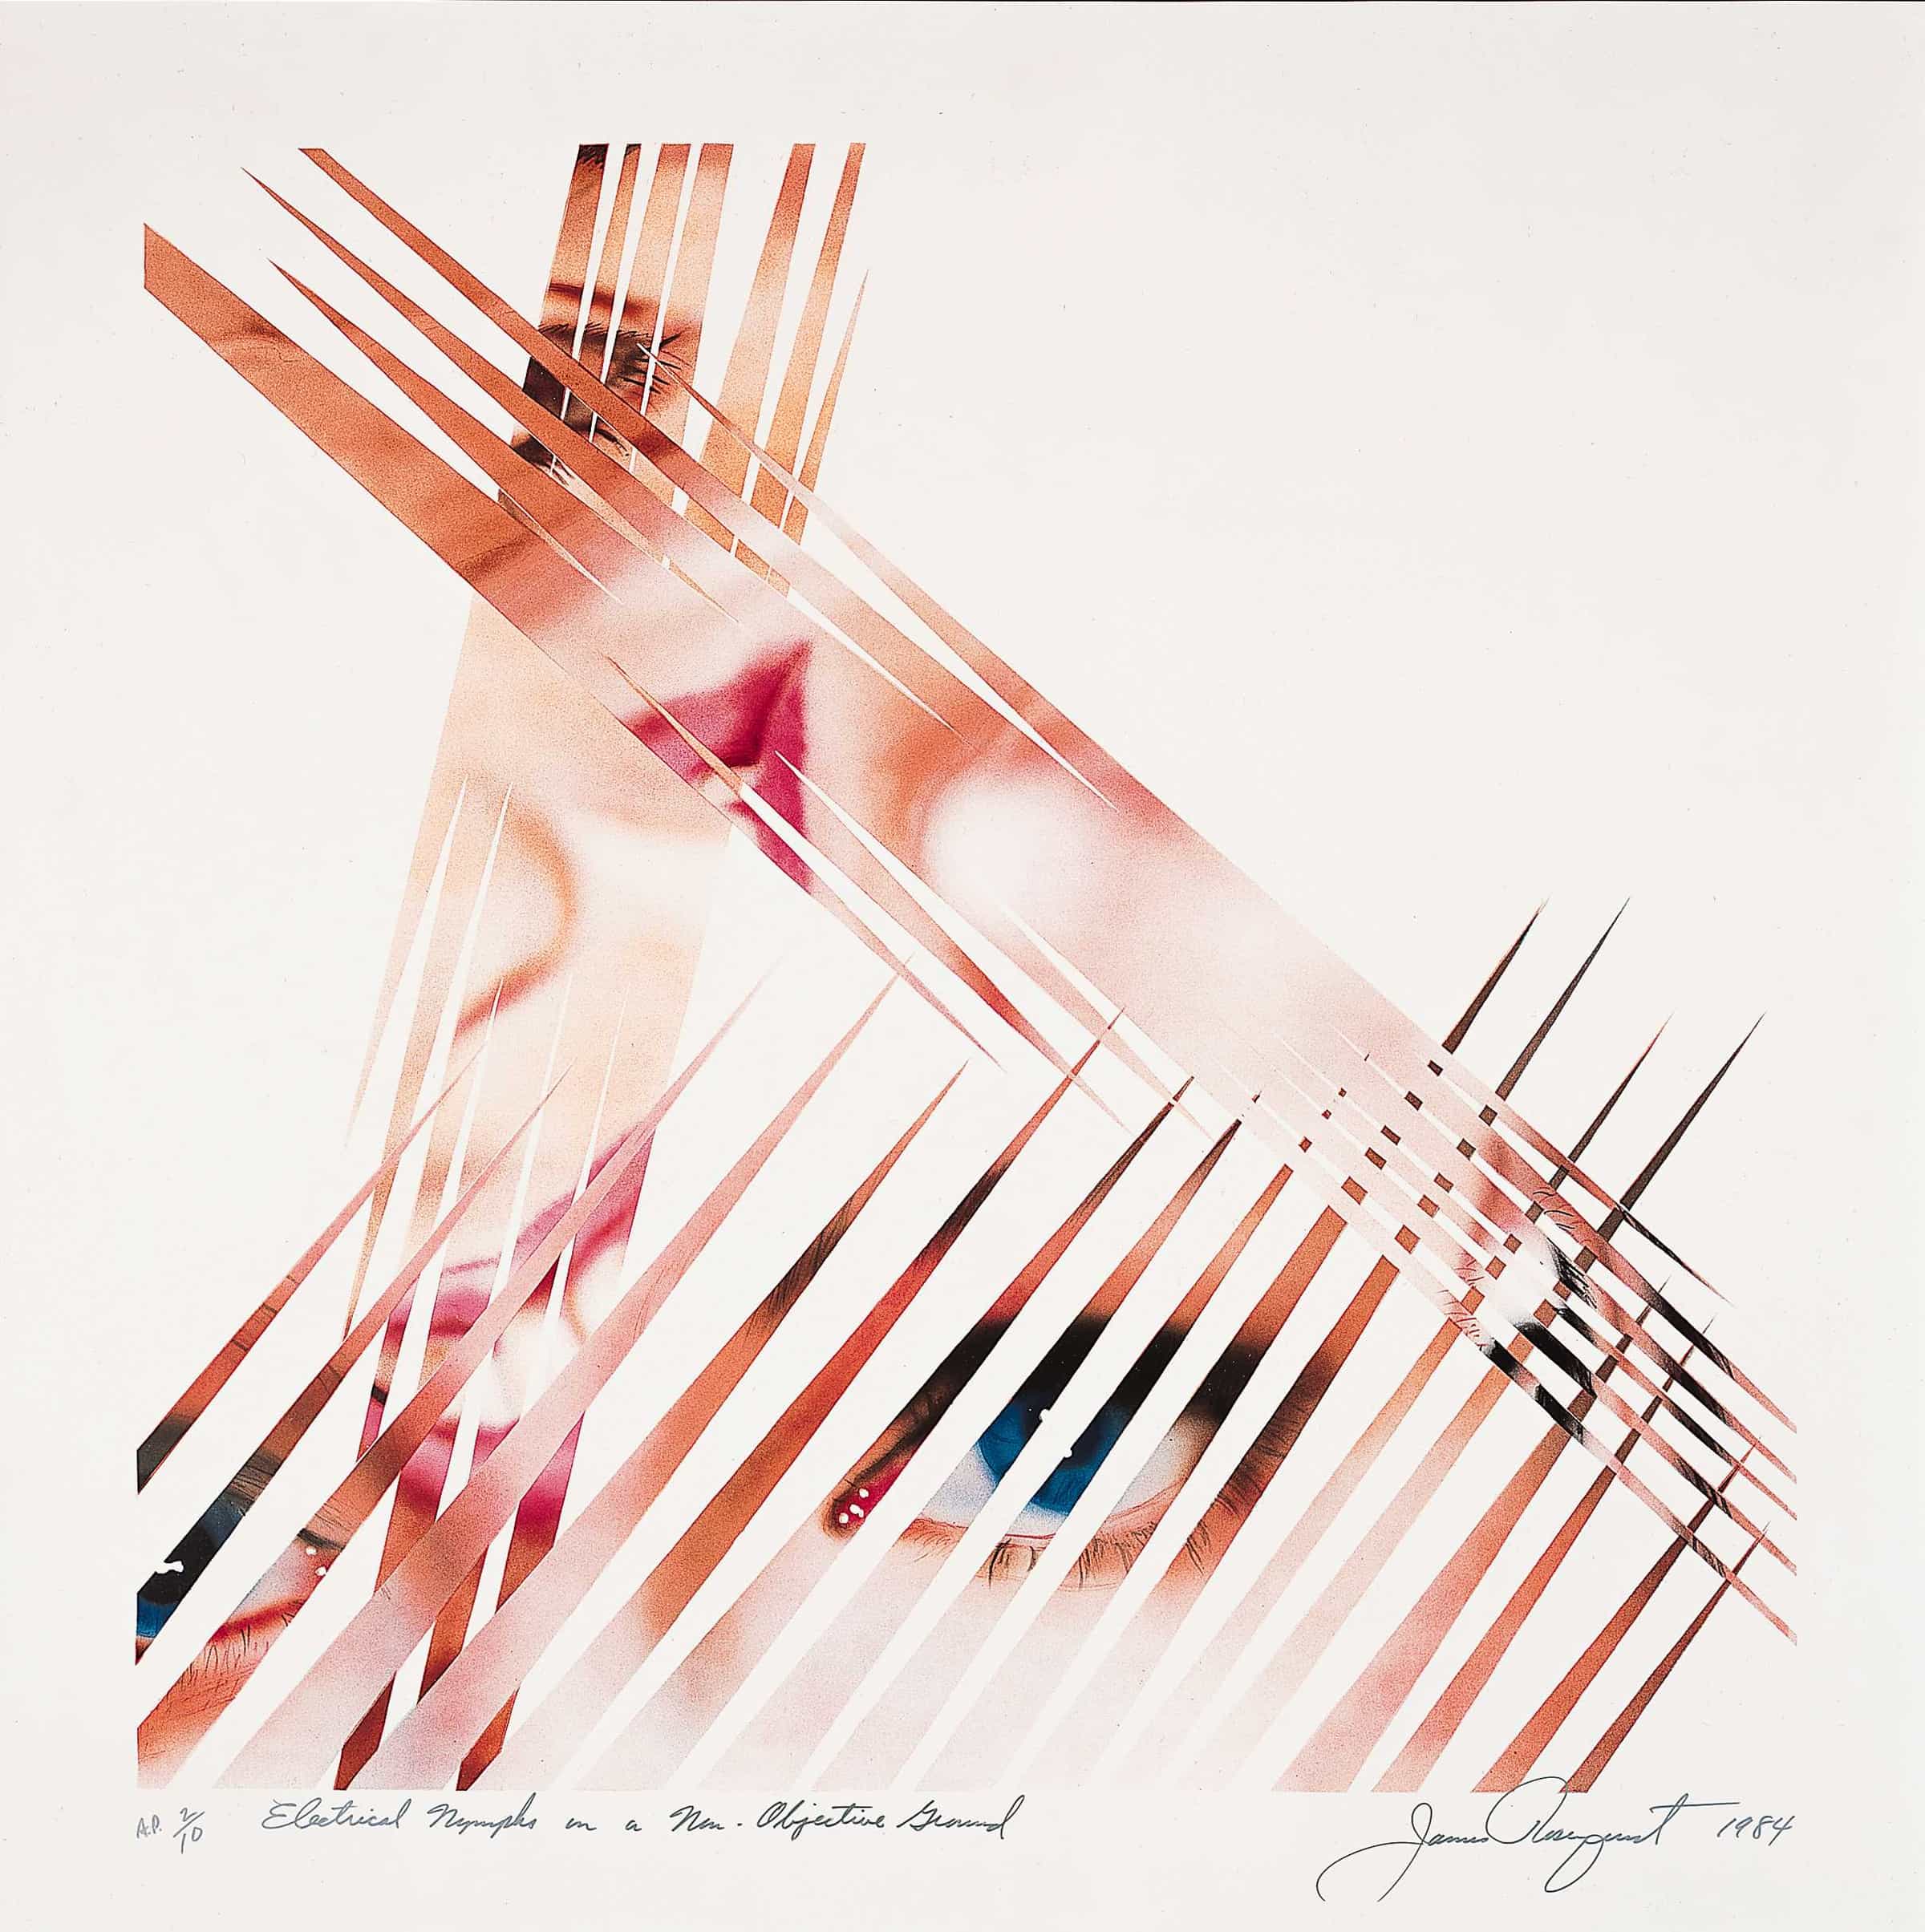 James Rosenquist, Electrical Nymphs on a Non-Objective Ground, 1984